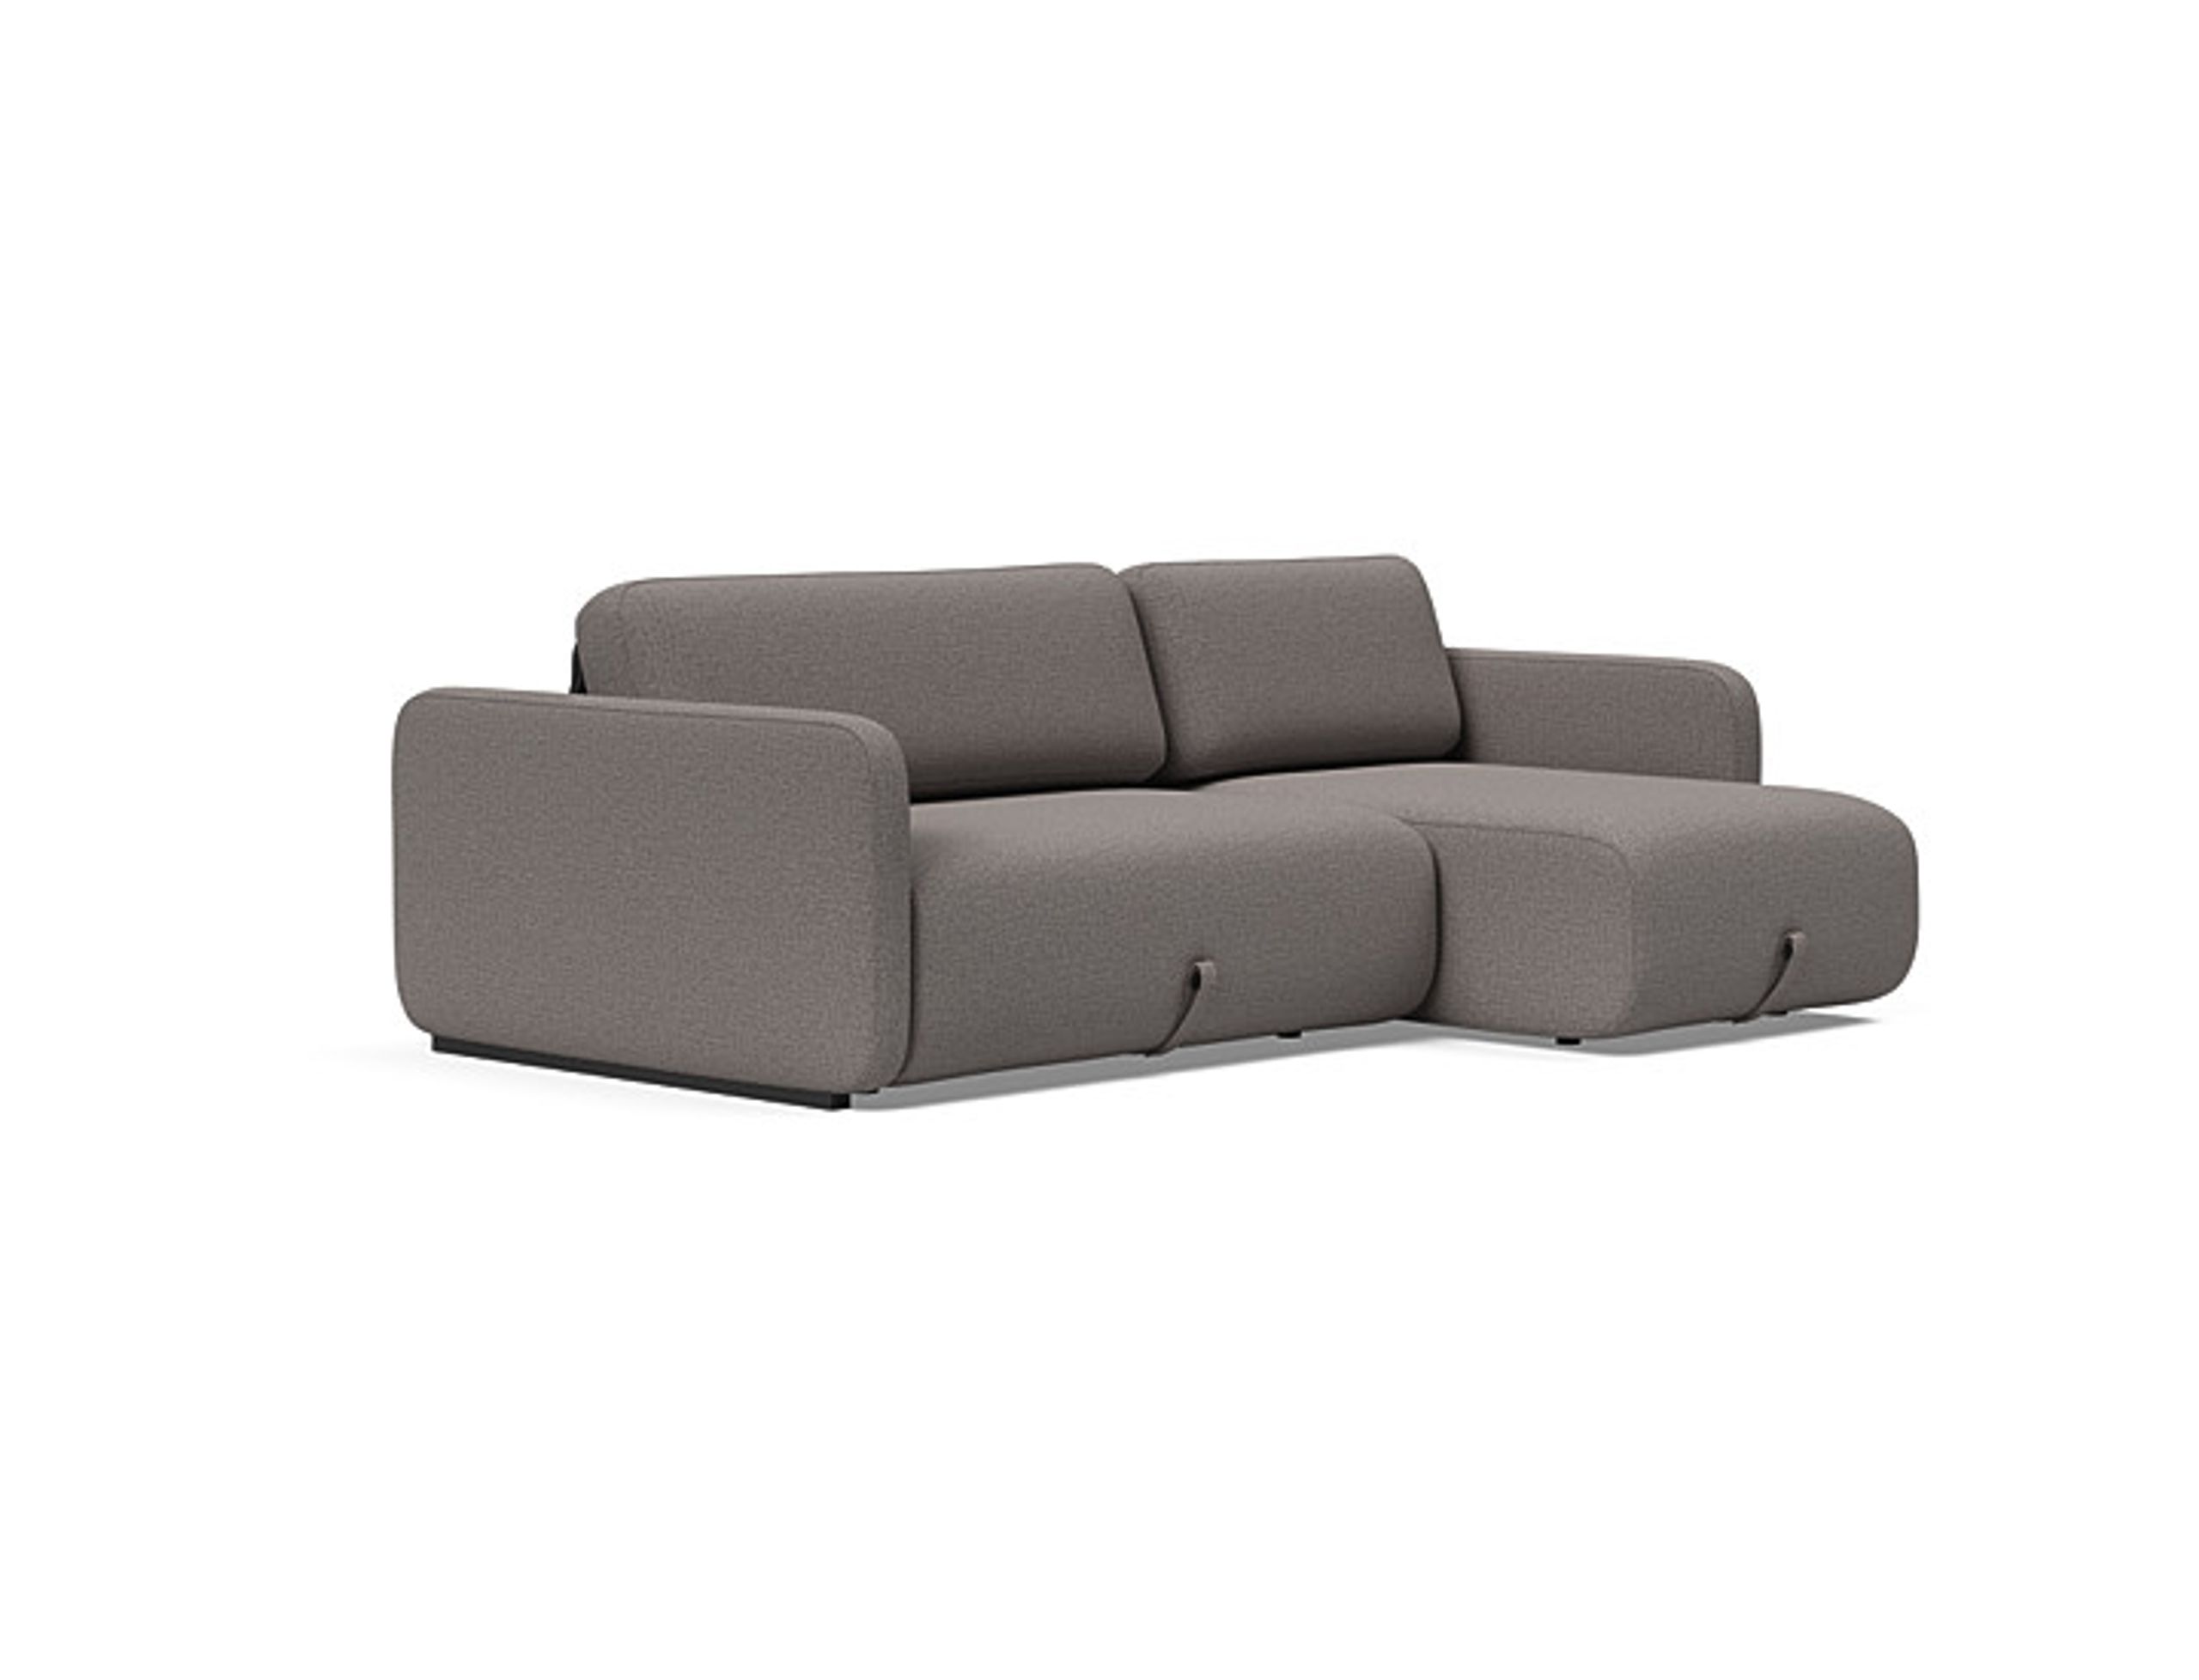 Vogan Lounger Sofa Bed Couch